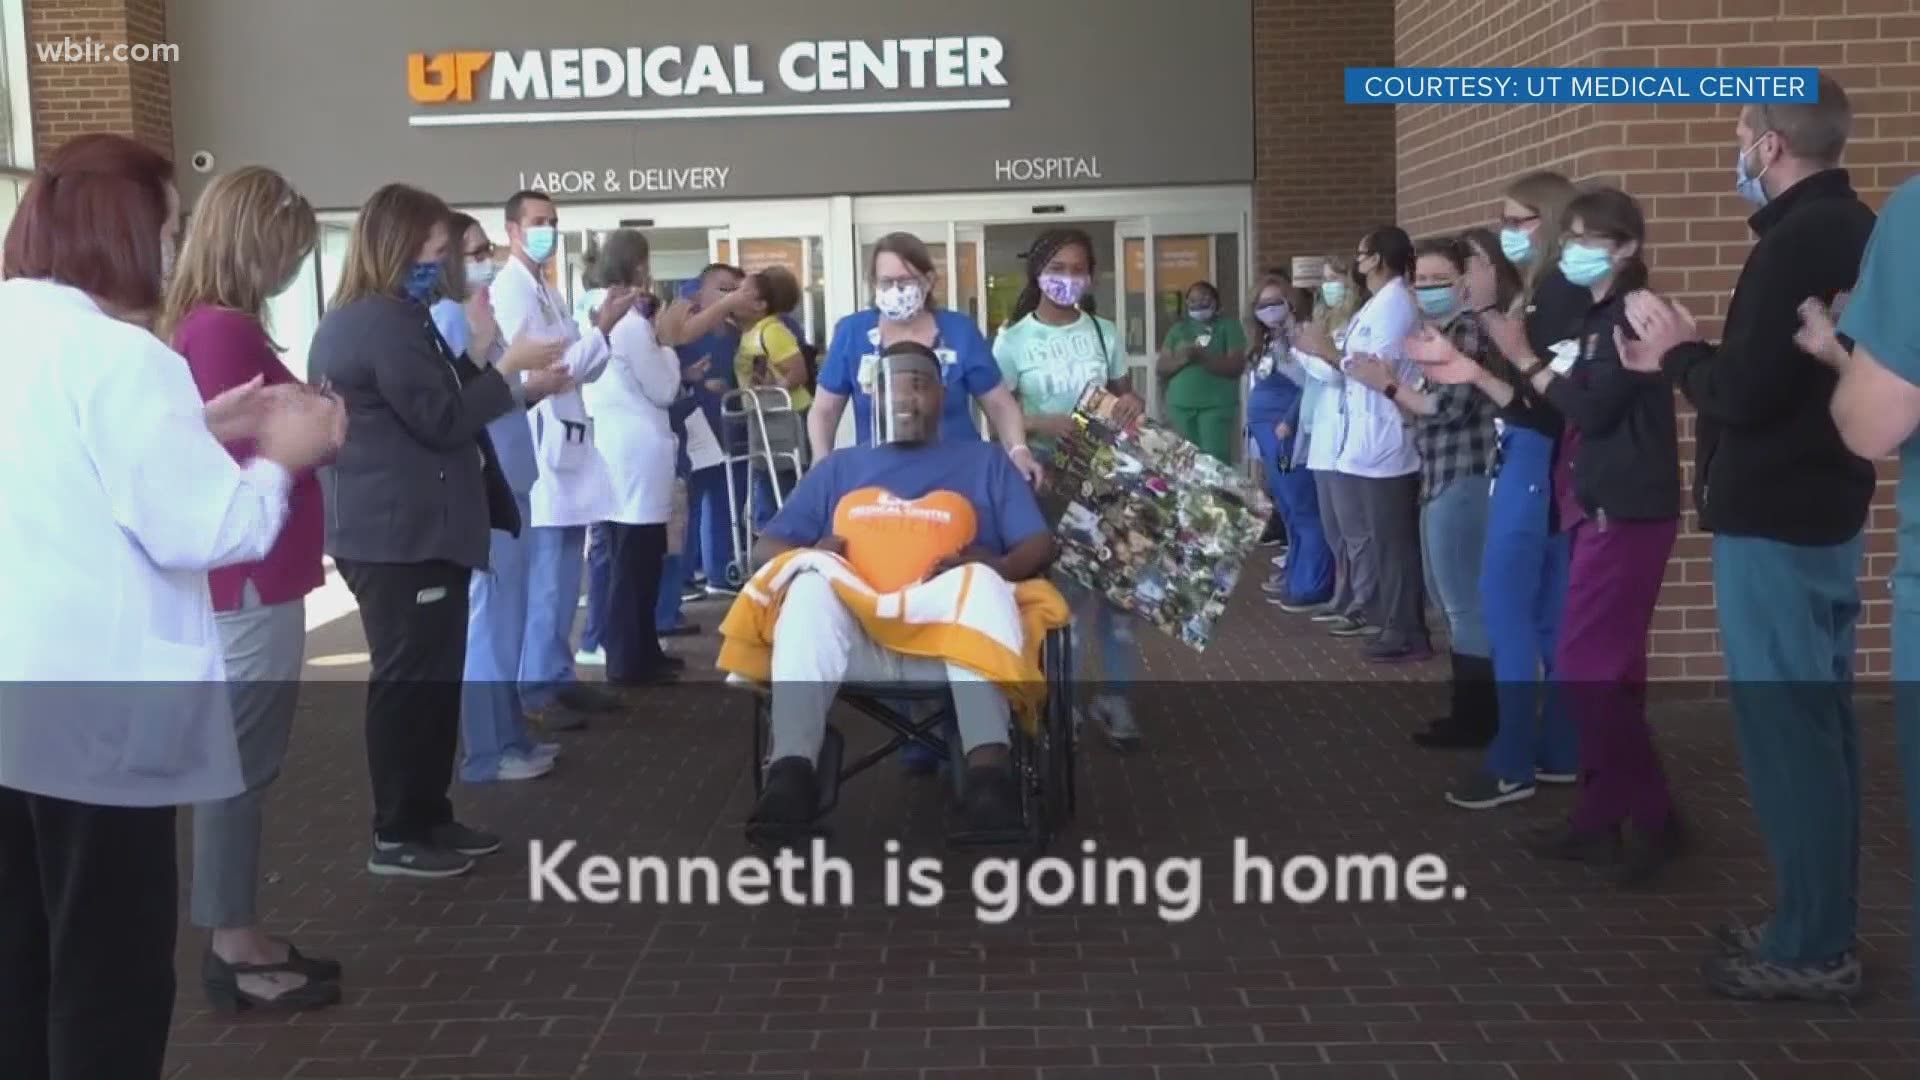 After more than 80 days at the University of Tennessee Medical Center, a COVID-19 patient is going home.